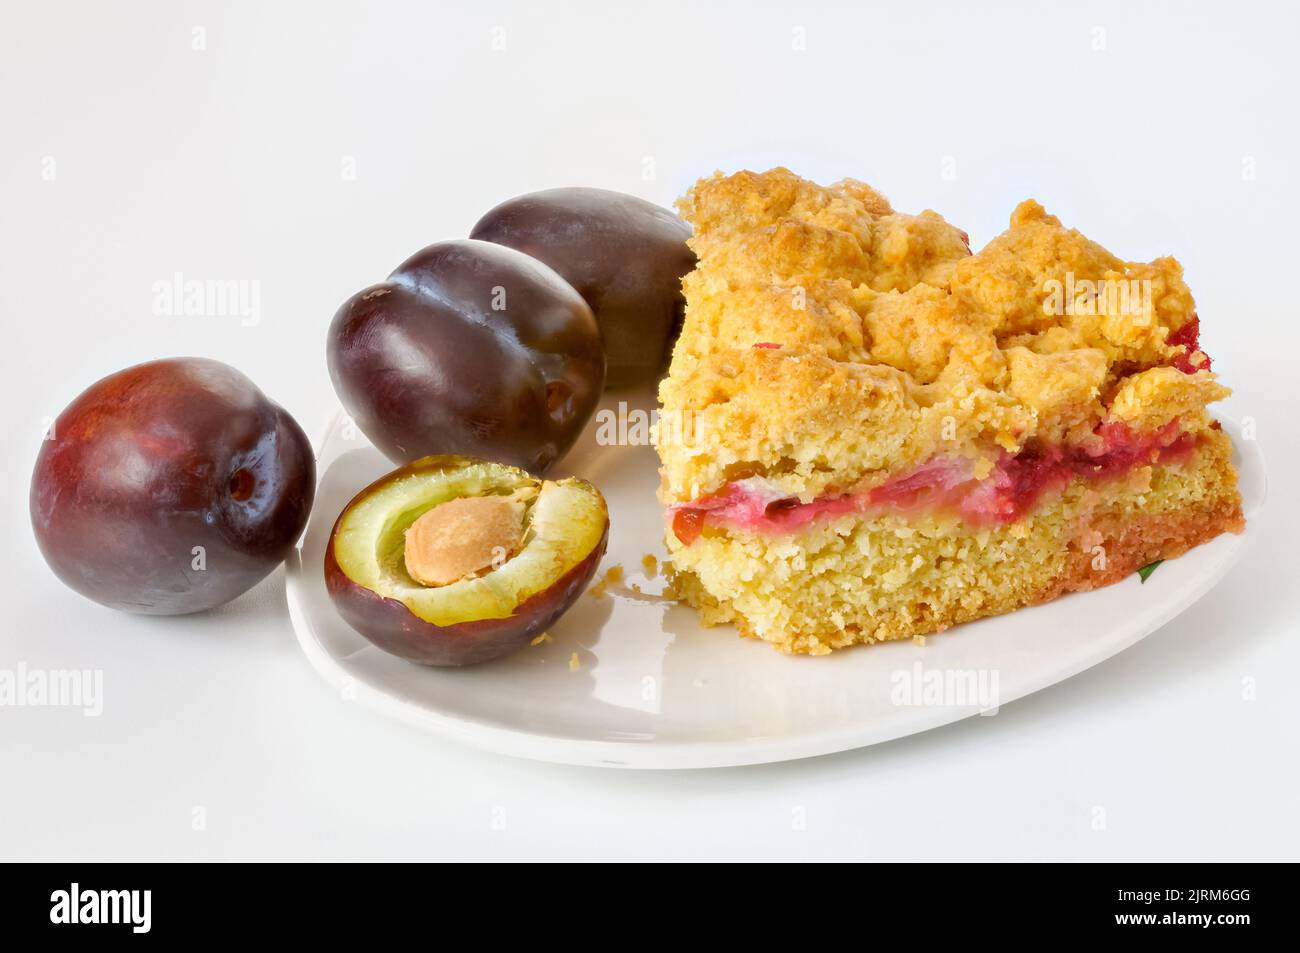 fruit cake and plums on a saucer on a white background Stock Photo